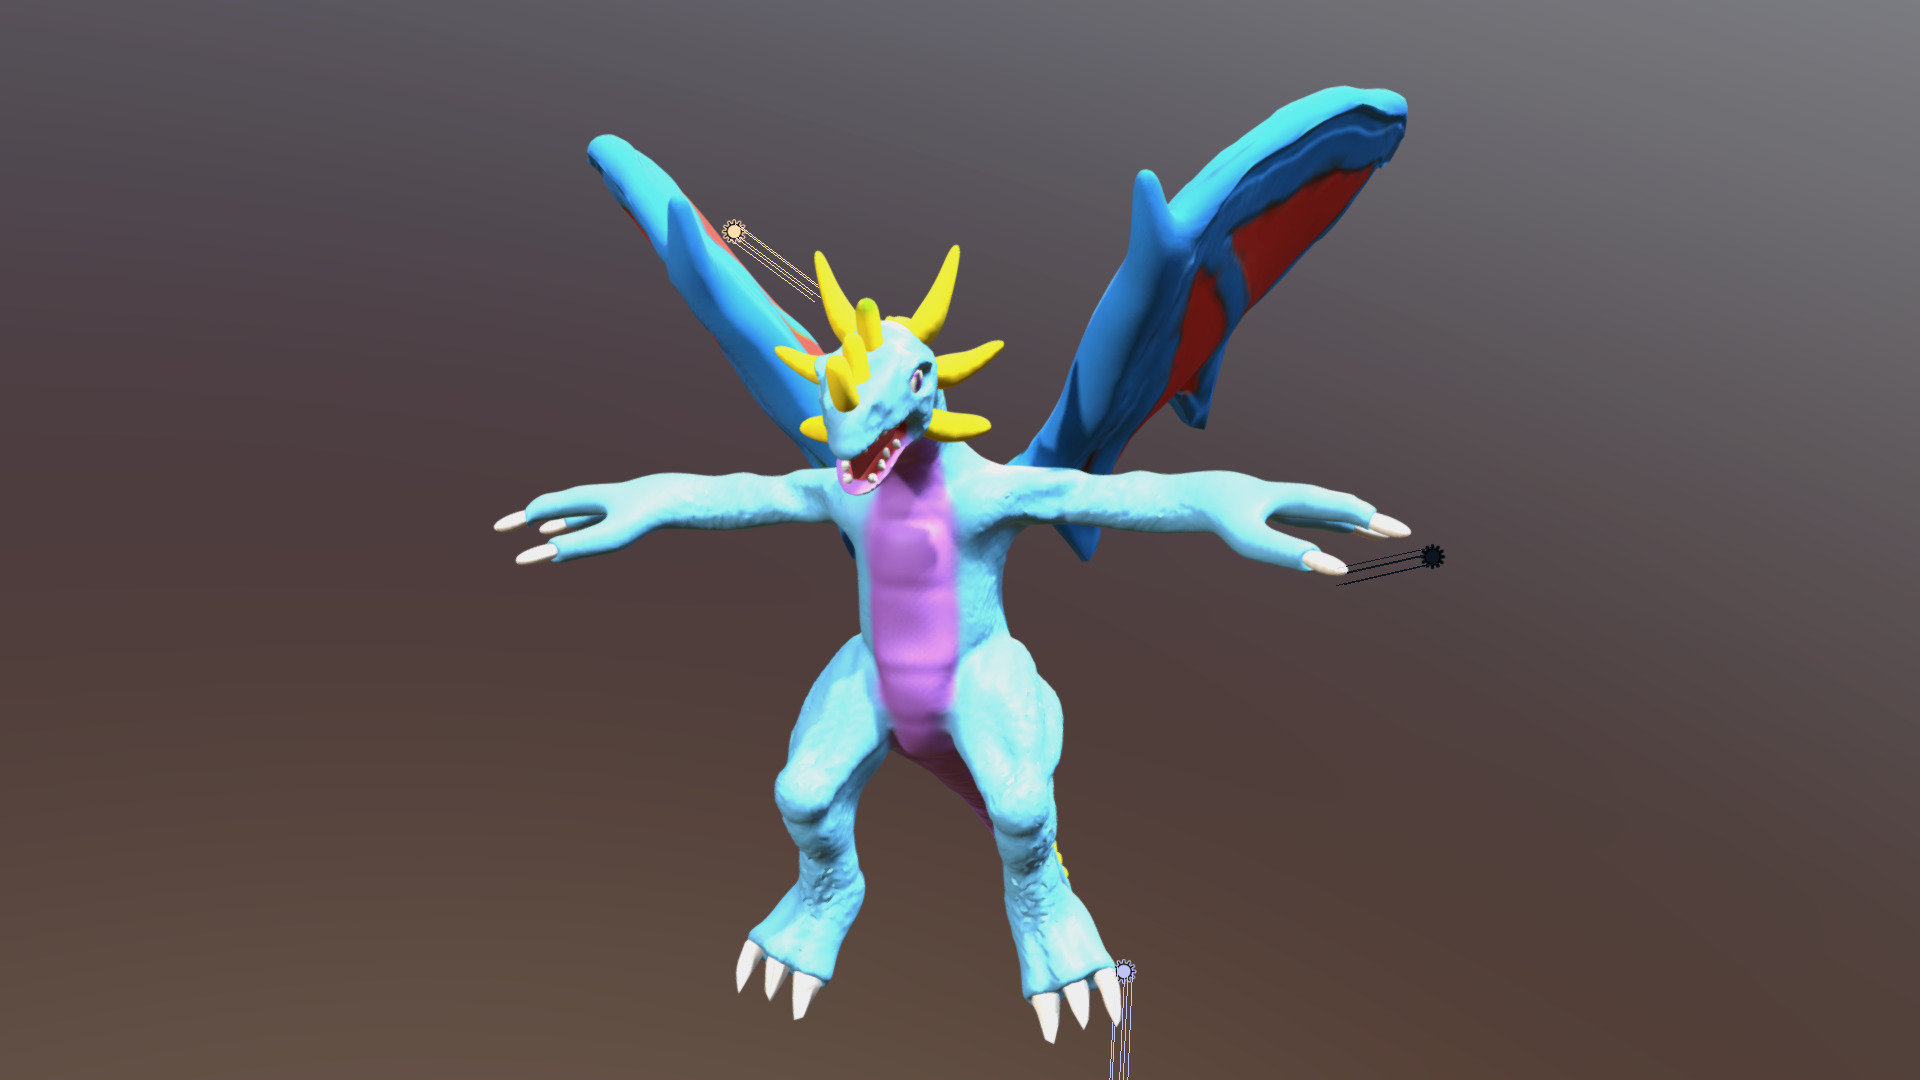 Dragon Adult Luxion Character 3d Creatures Monster Dragon - Luxion Dragon Adult - Download Free 3D model by xeratdragons (@dragonights91) 3d model